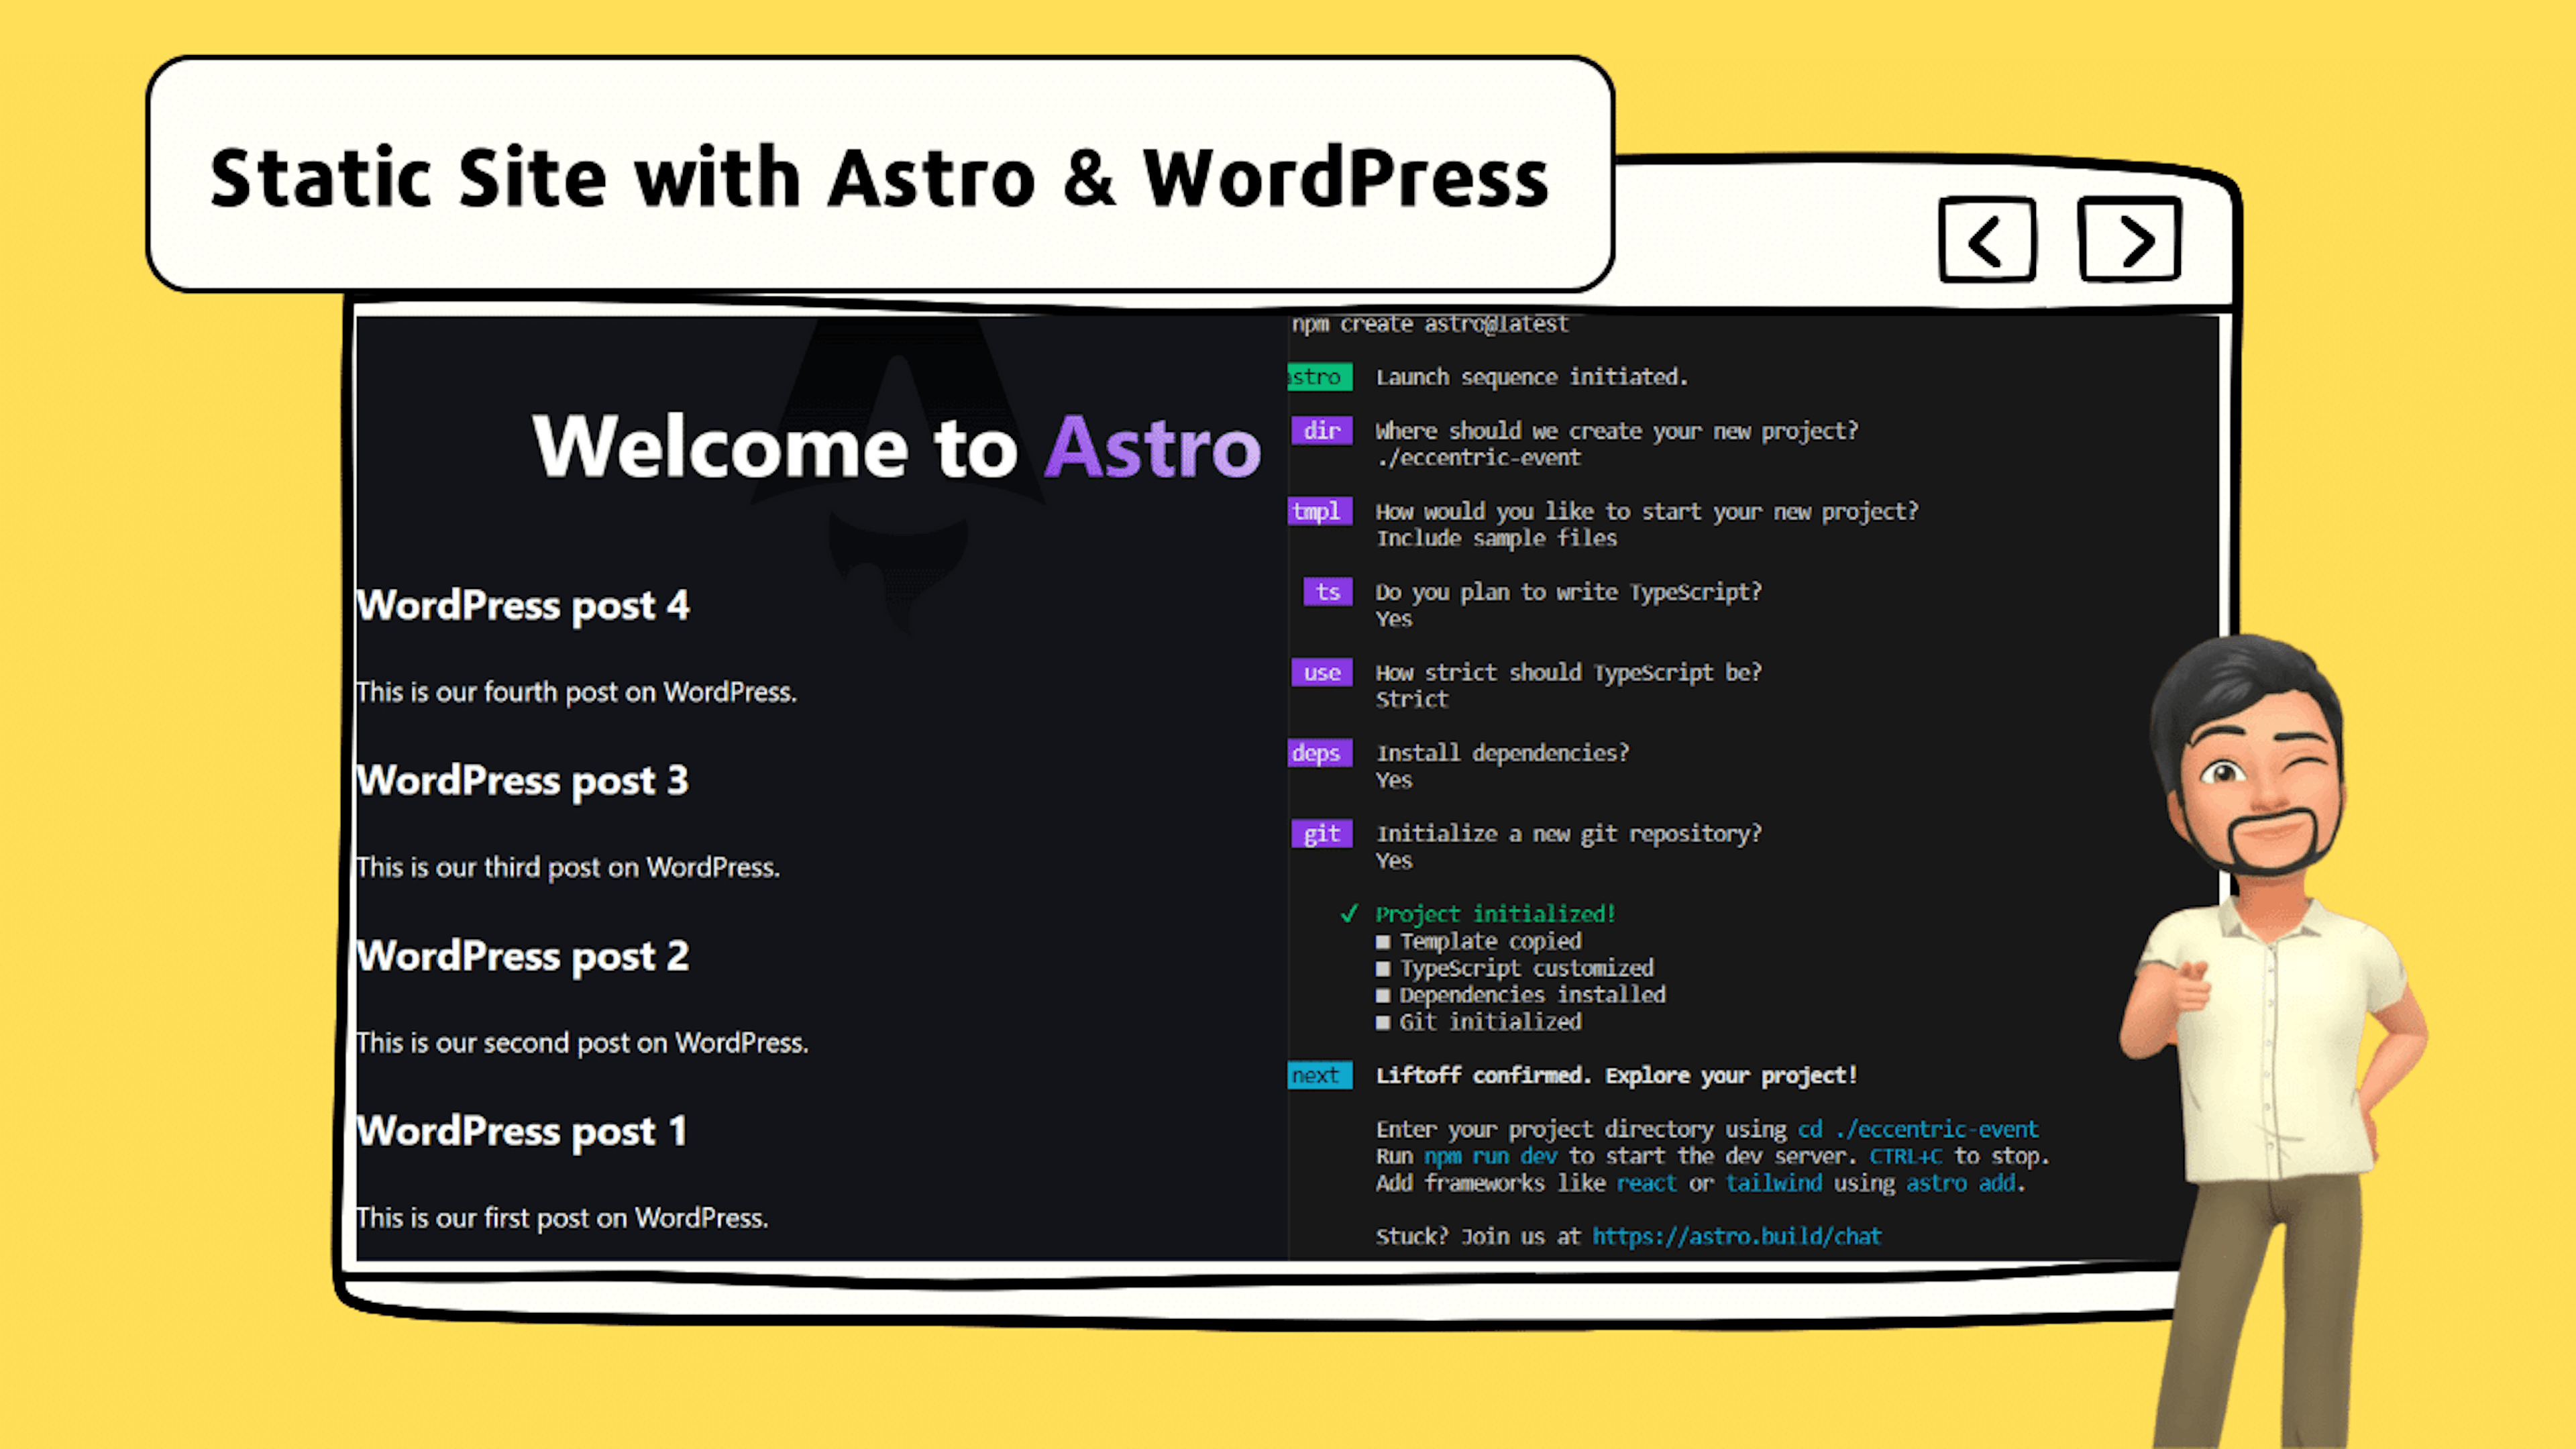 Static Site with Astro and WordPress